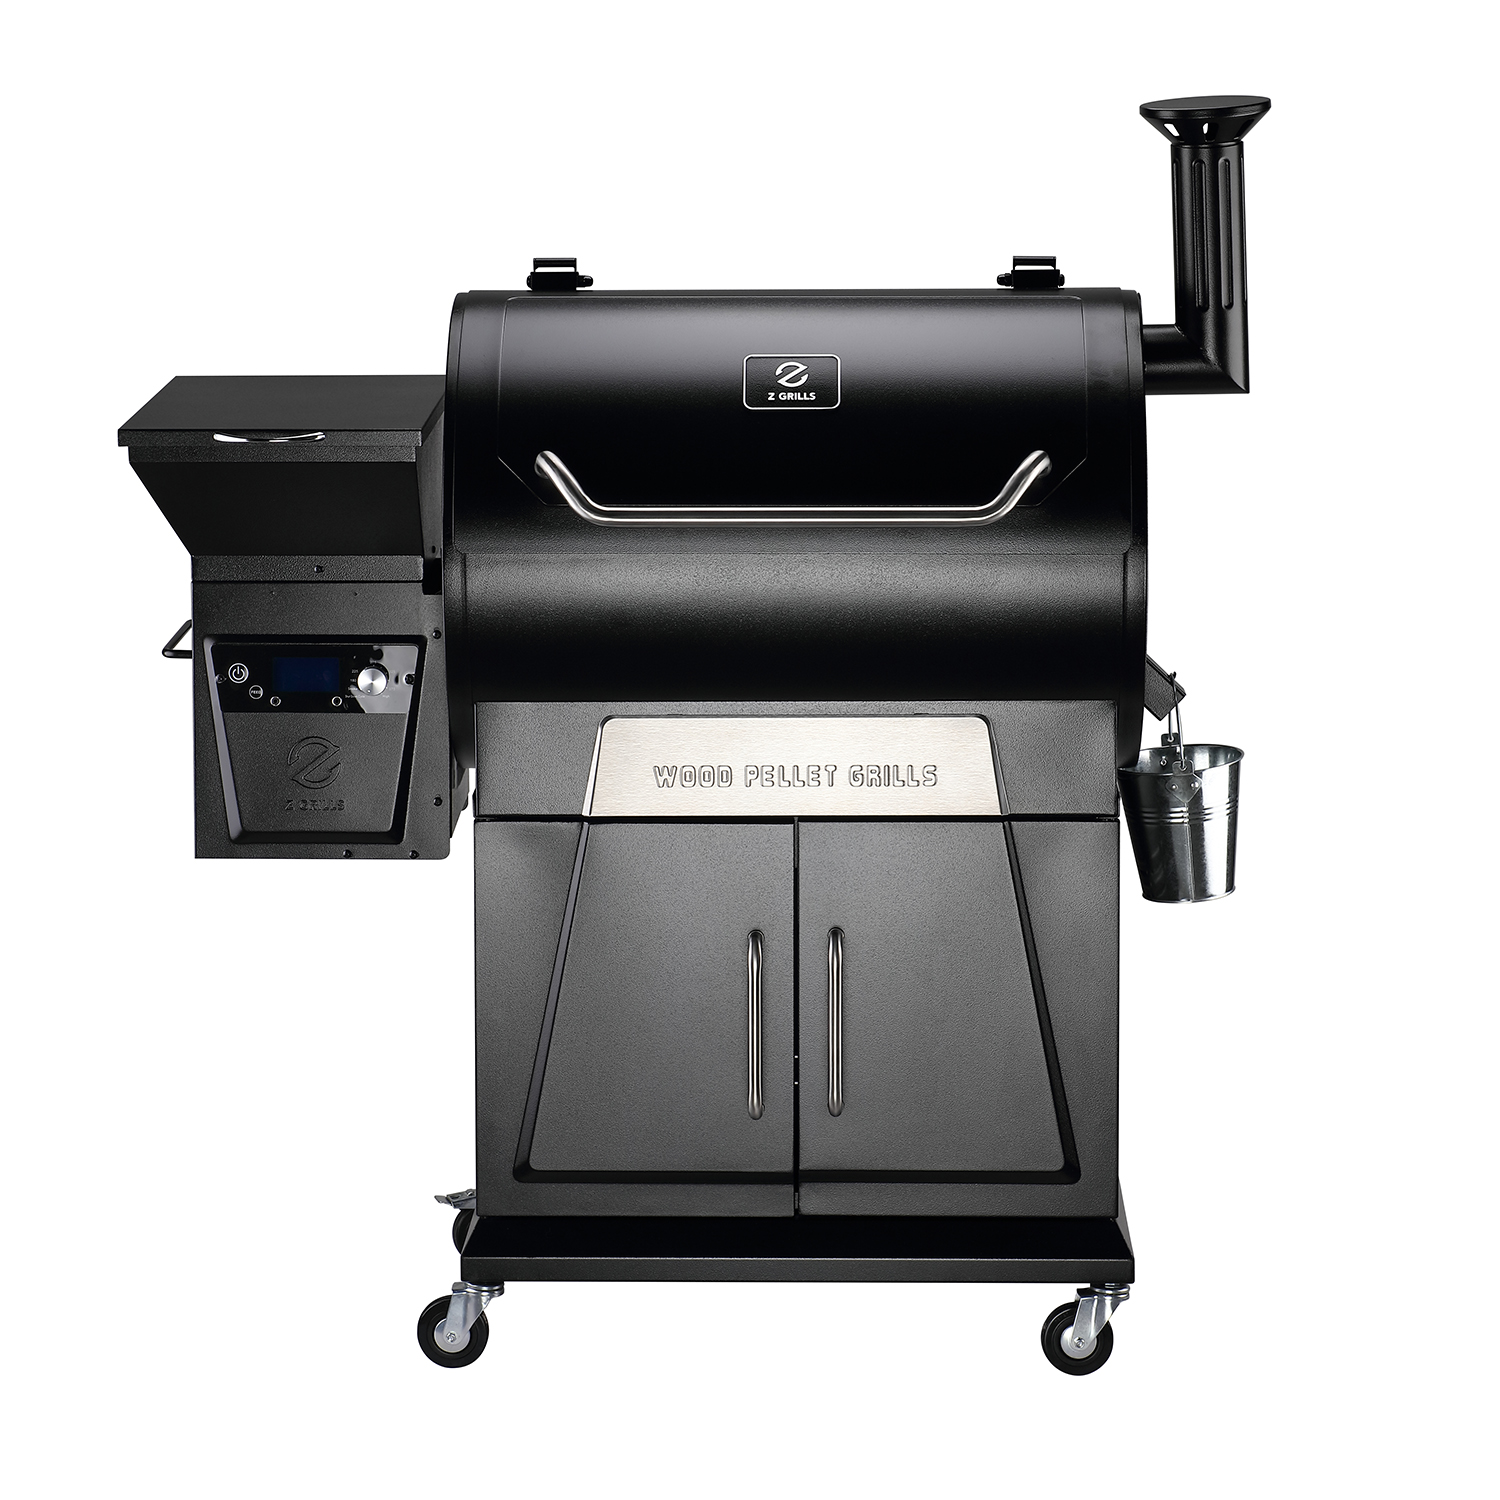 Z GRILLS 700D3 Wood Pellet Grill & Smoker with PID 2.1 Control, 697 SQ. in Cooking Area, Dual-walled Insulation, Huge Storage Cabinet, Hopper Clean-out and Grill Cover - image 1 of 12